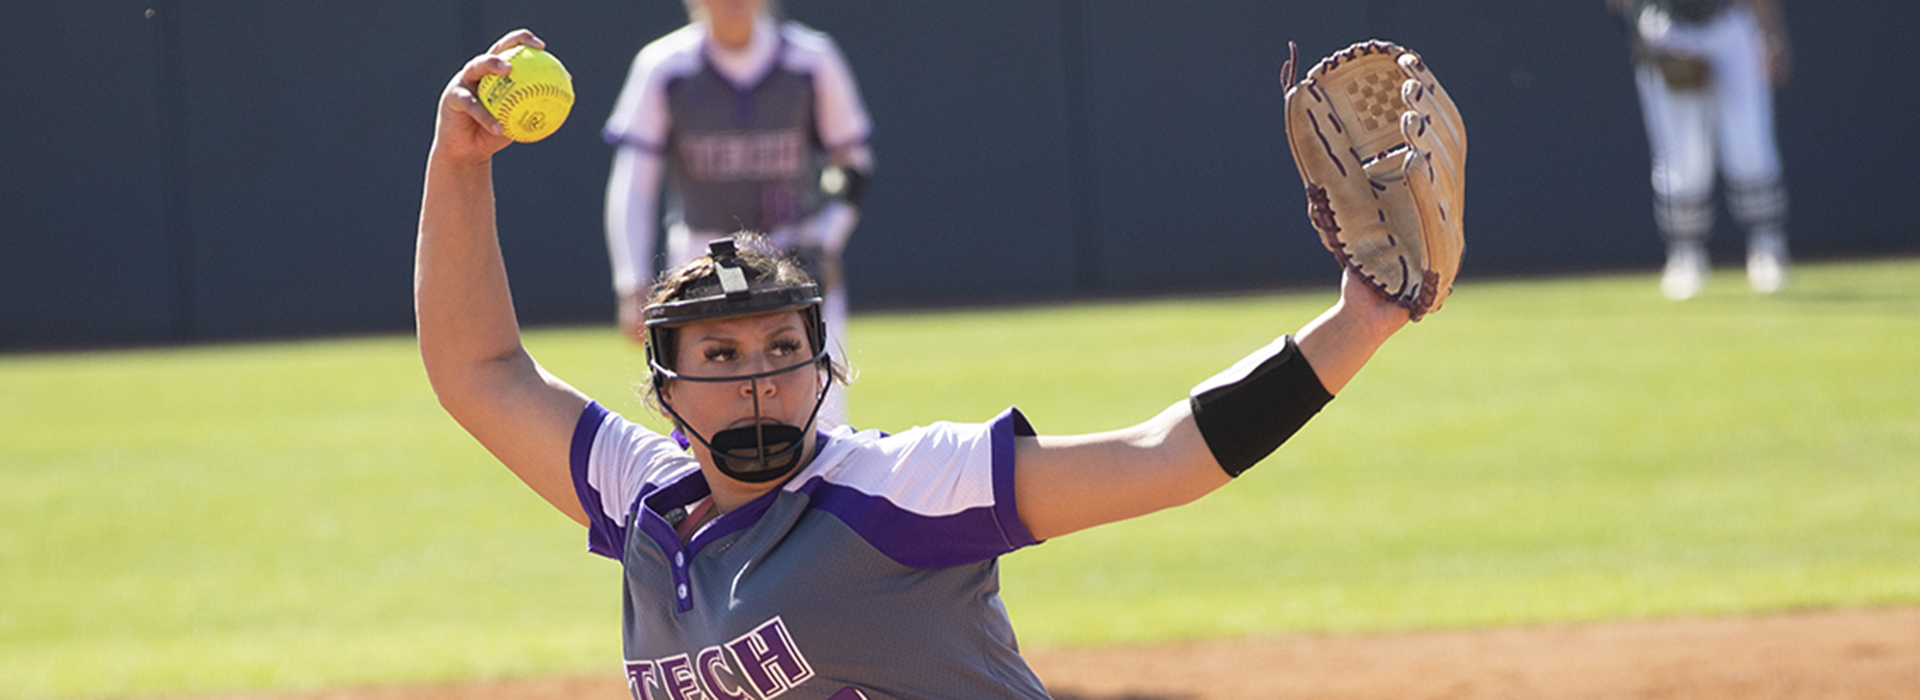 Golden Eagle softball faces weekend test at home vs. SEMO